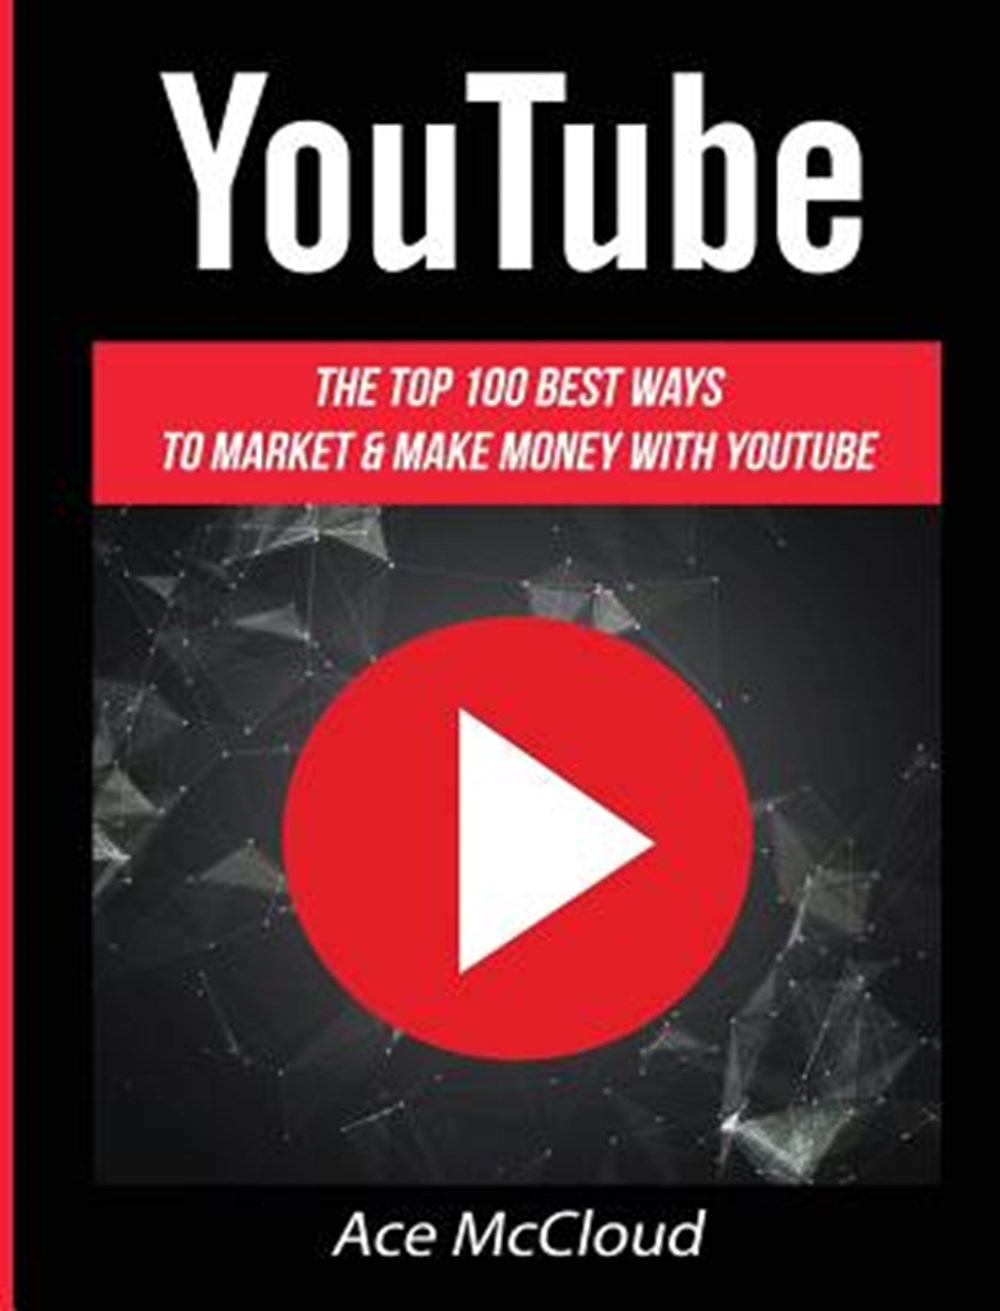 YouTube The Top 100 Best Ways To Market & Make Money With YouTube